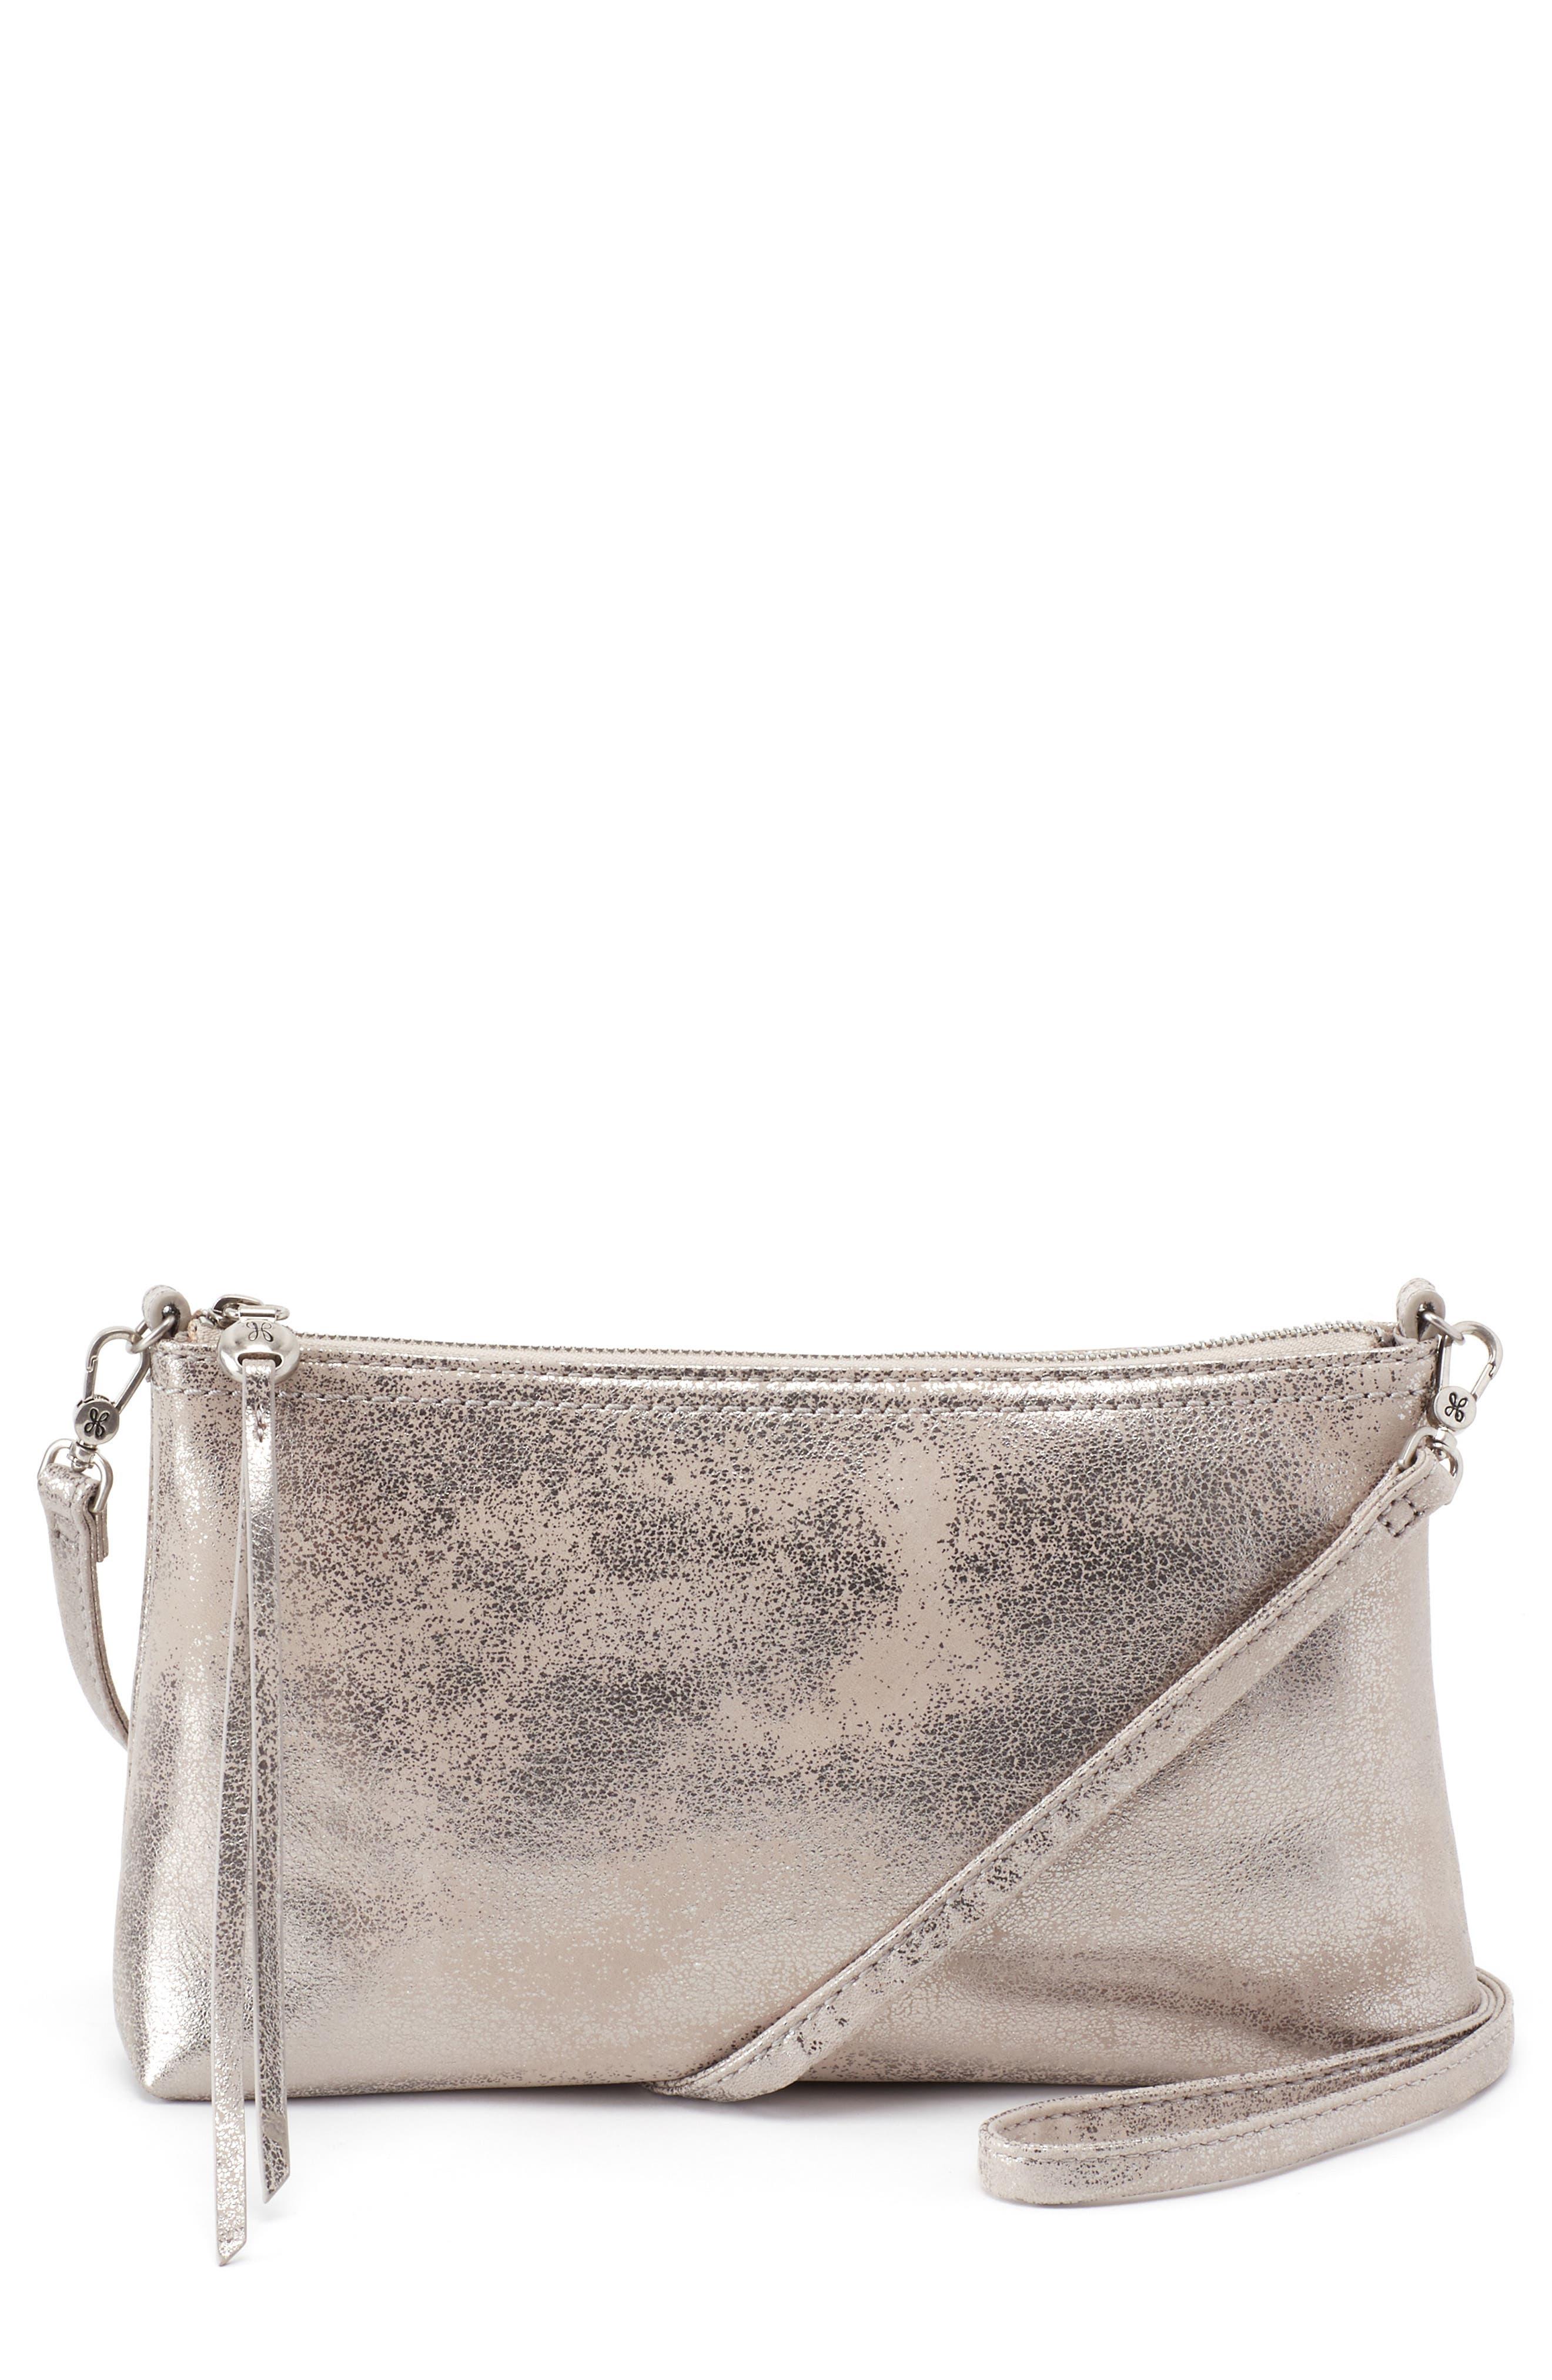 Hobo International Darcy Convertible Leather Crossbody Bag In ...